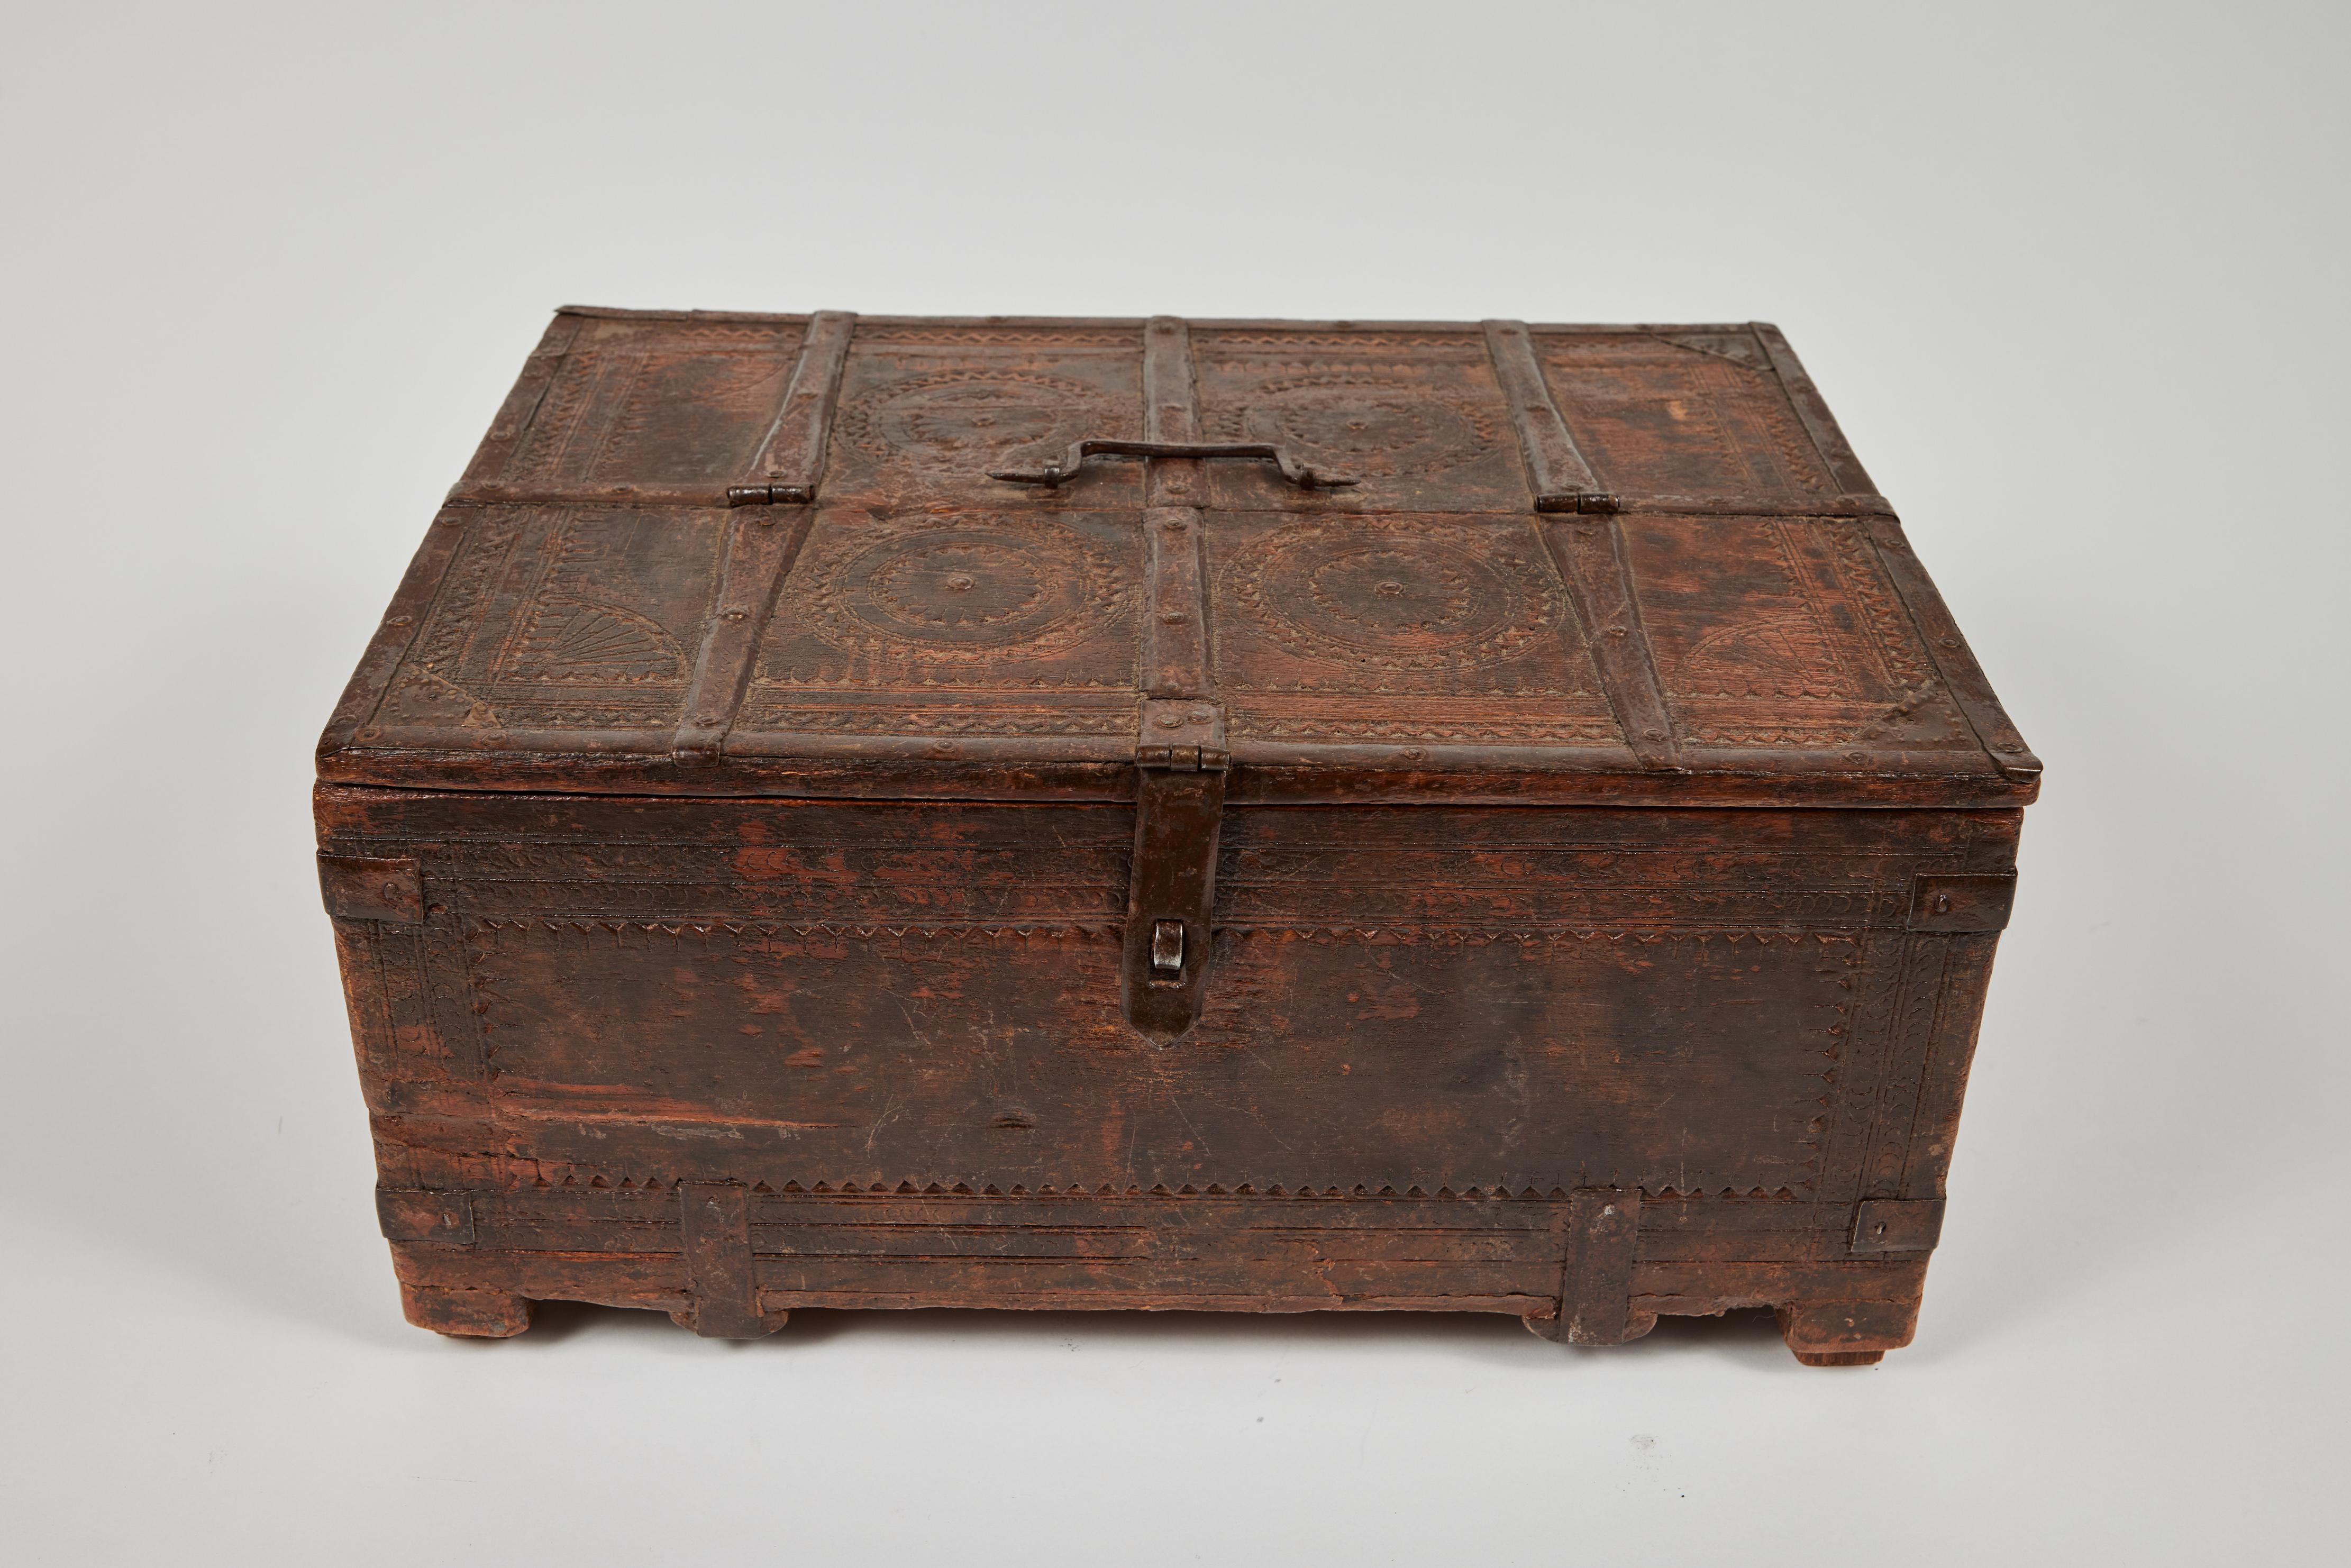 Antique large footed wood keepsake box with hand tooled decoration, hinged lid and metal handle and fittings.